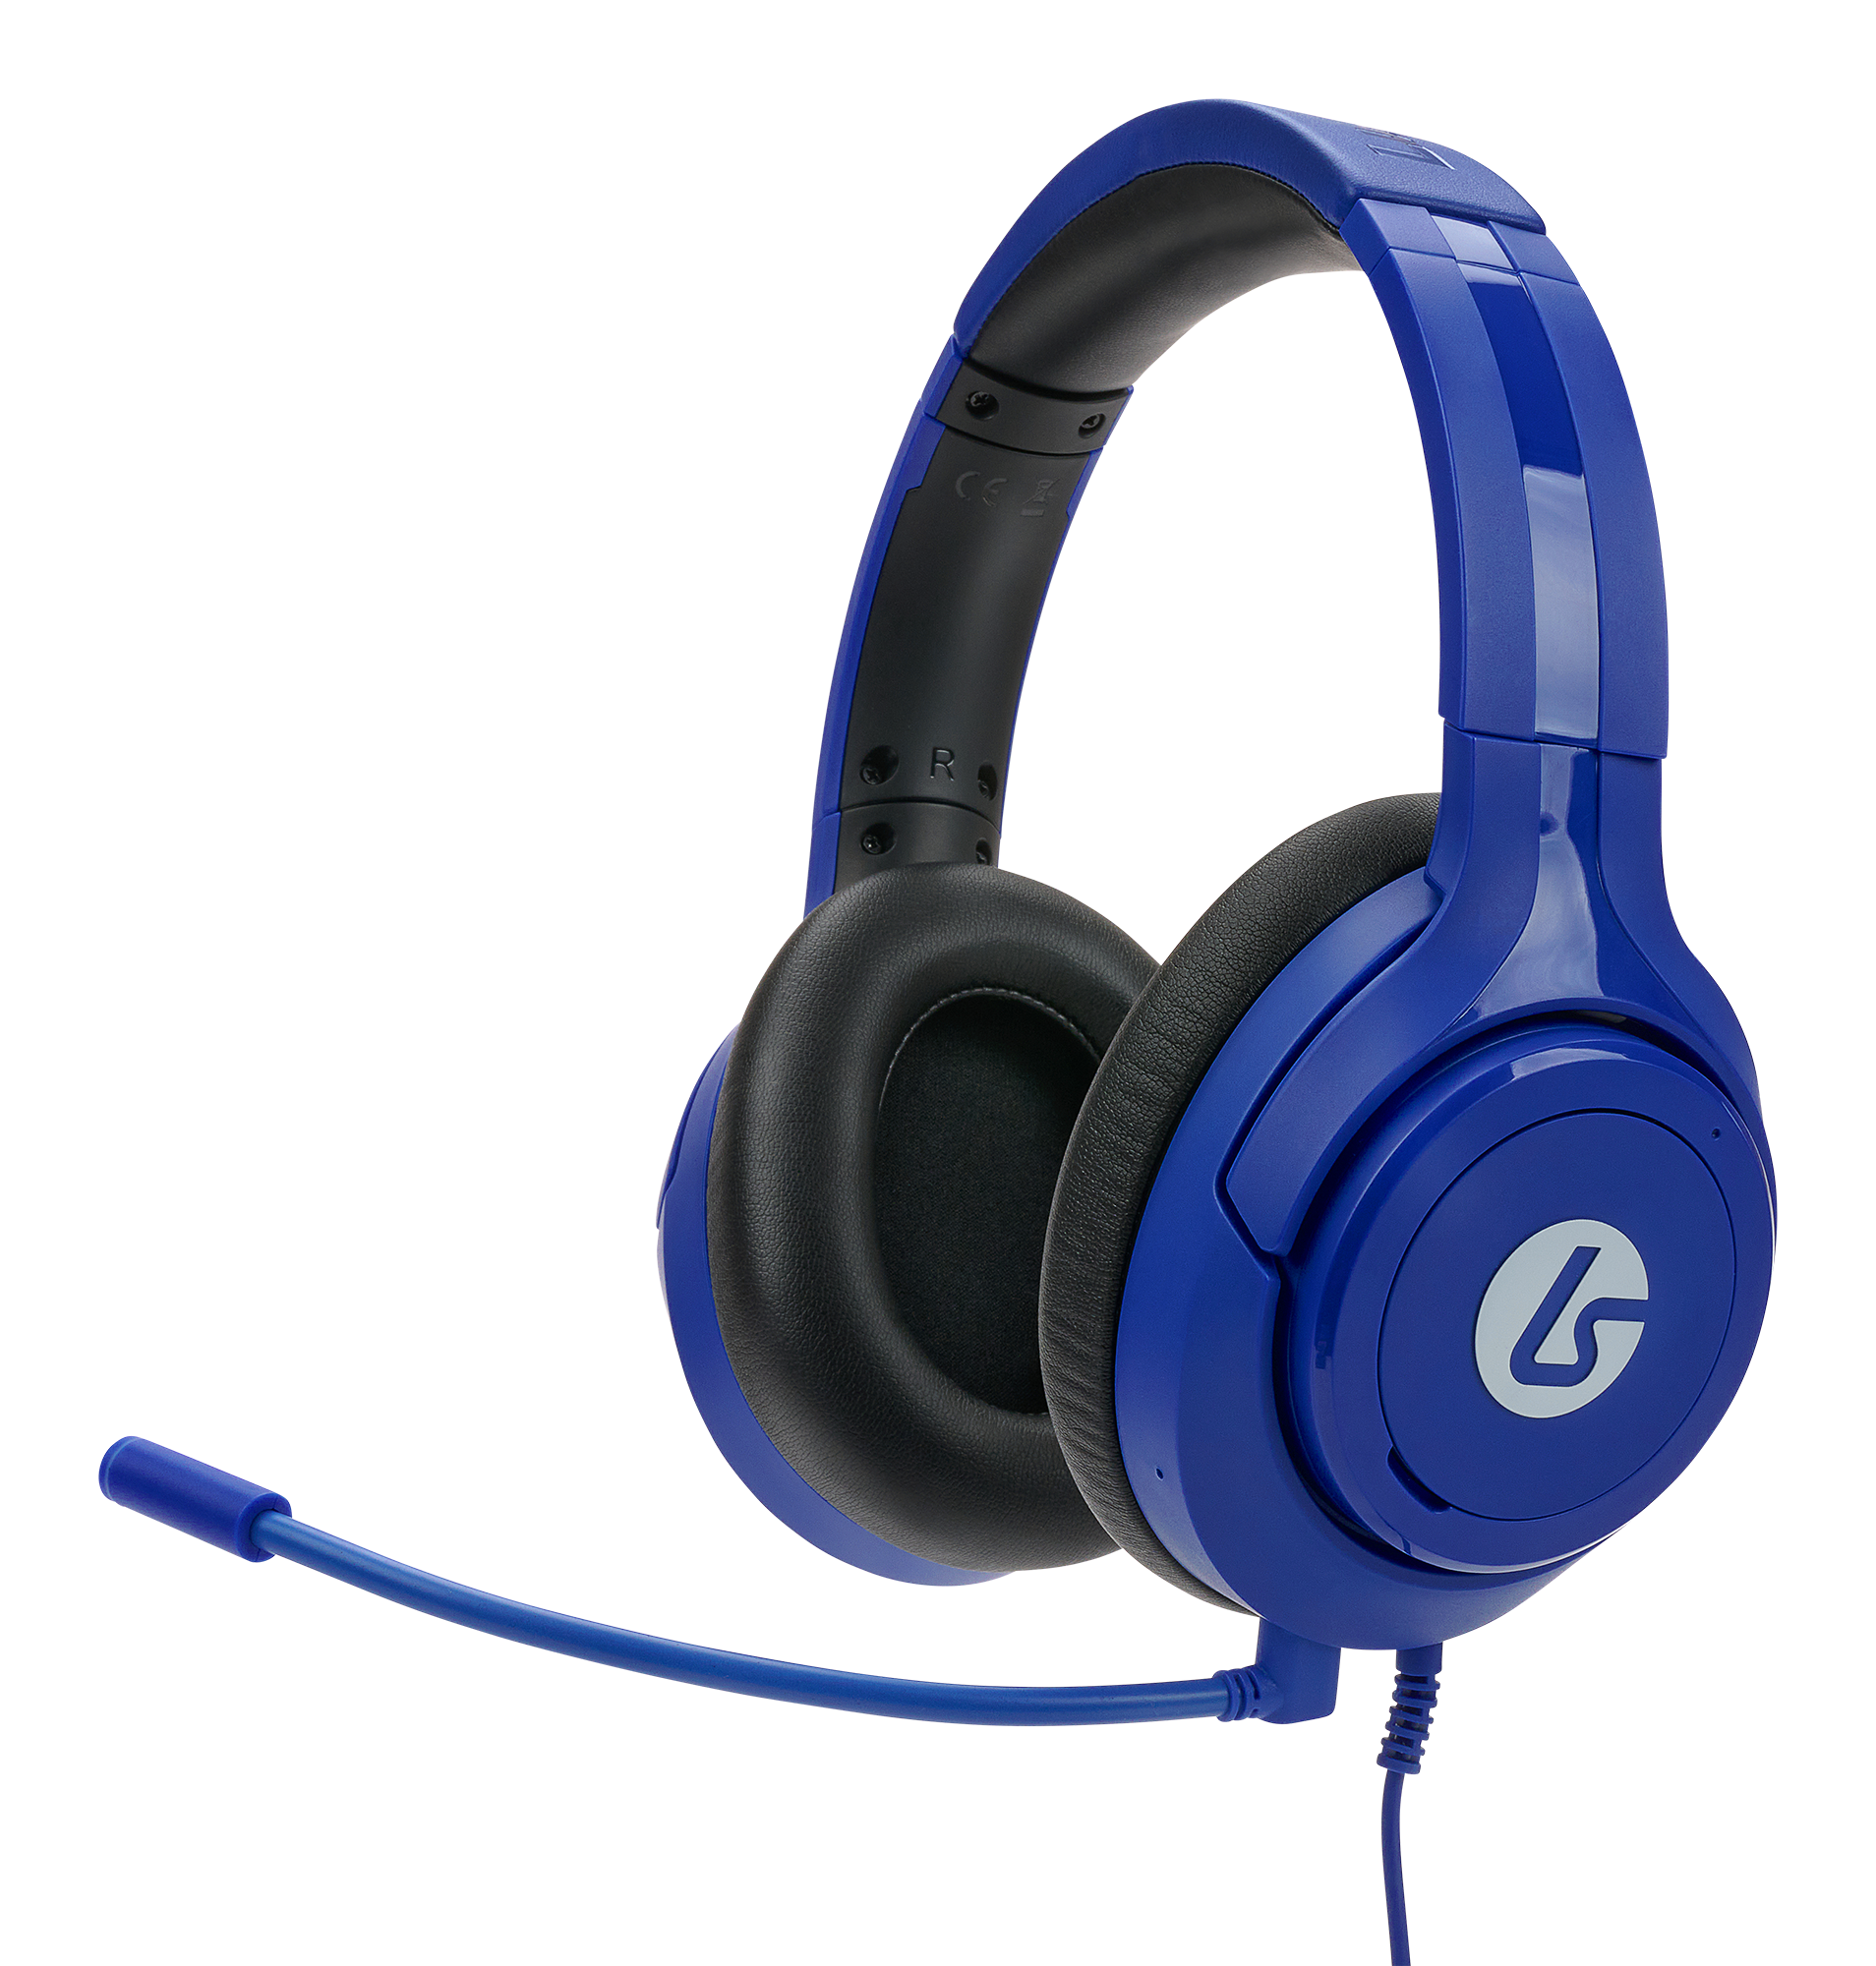 RPM Euro Games 3D Ultra Wired Gaming Headphones (Blue) – RPM Euro Games